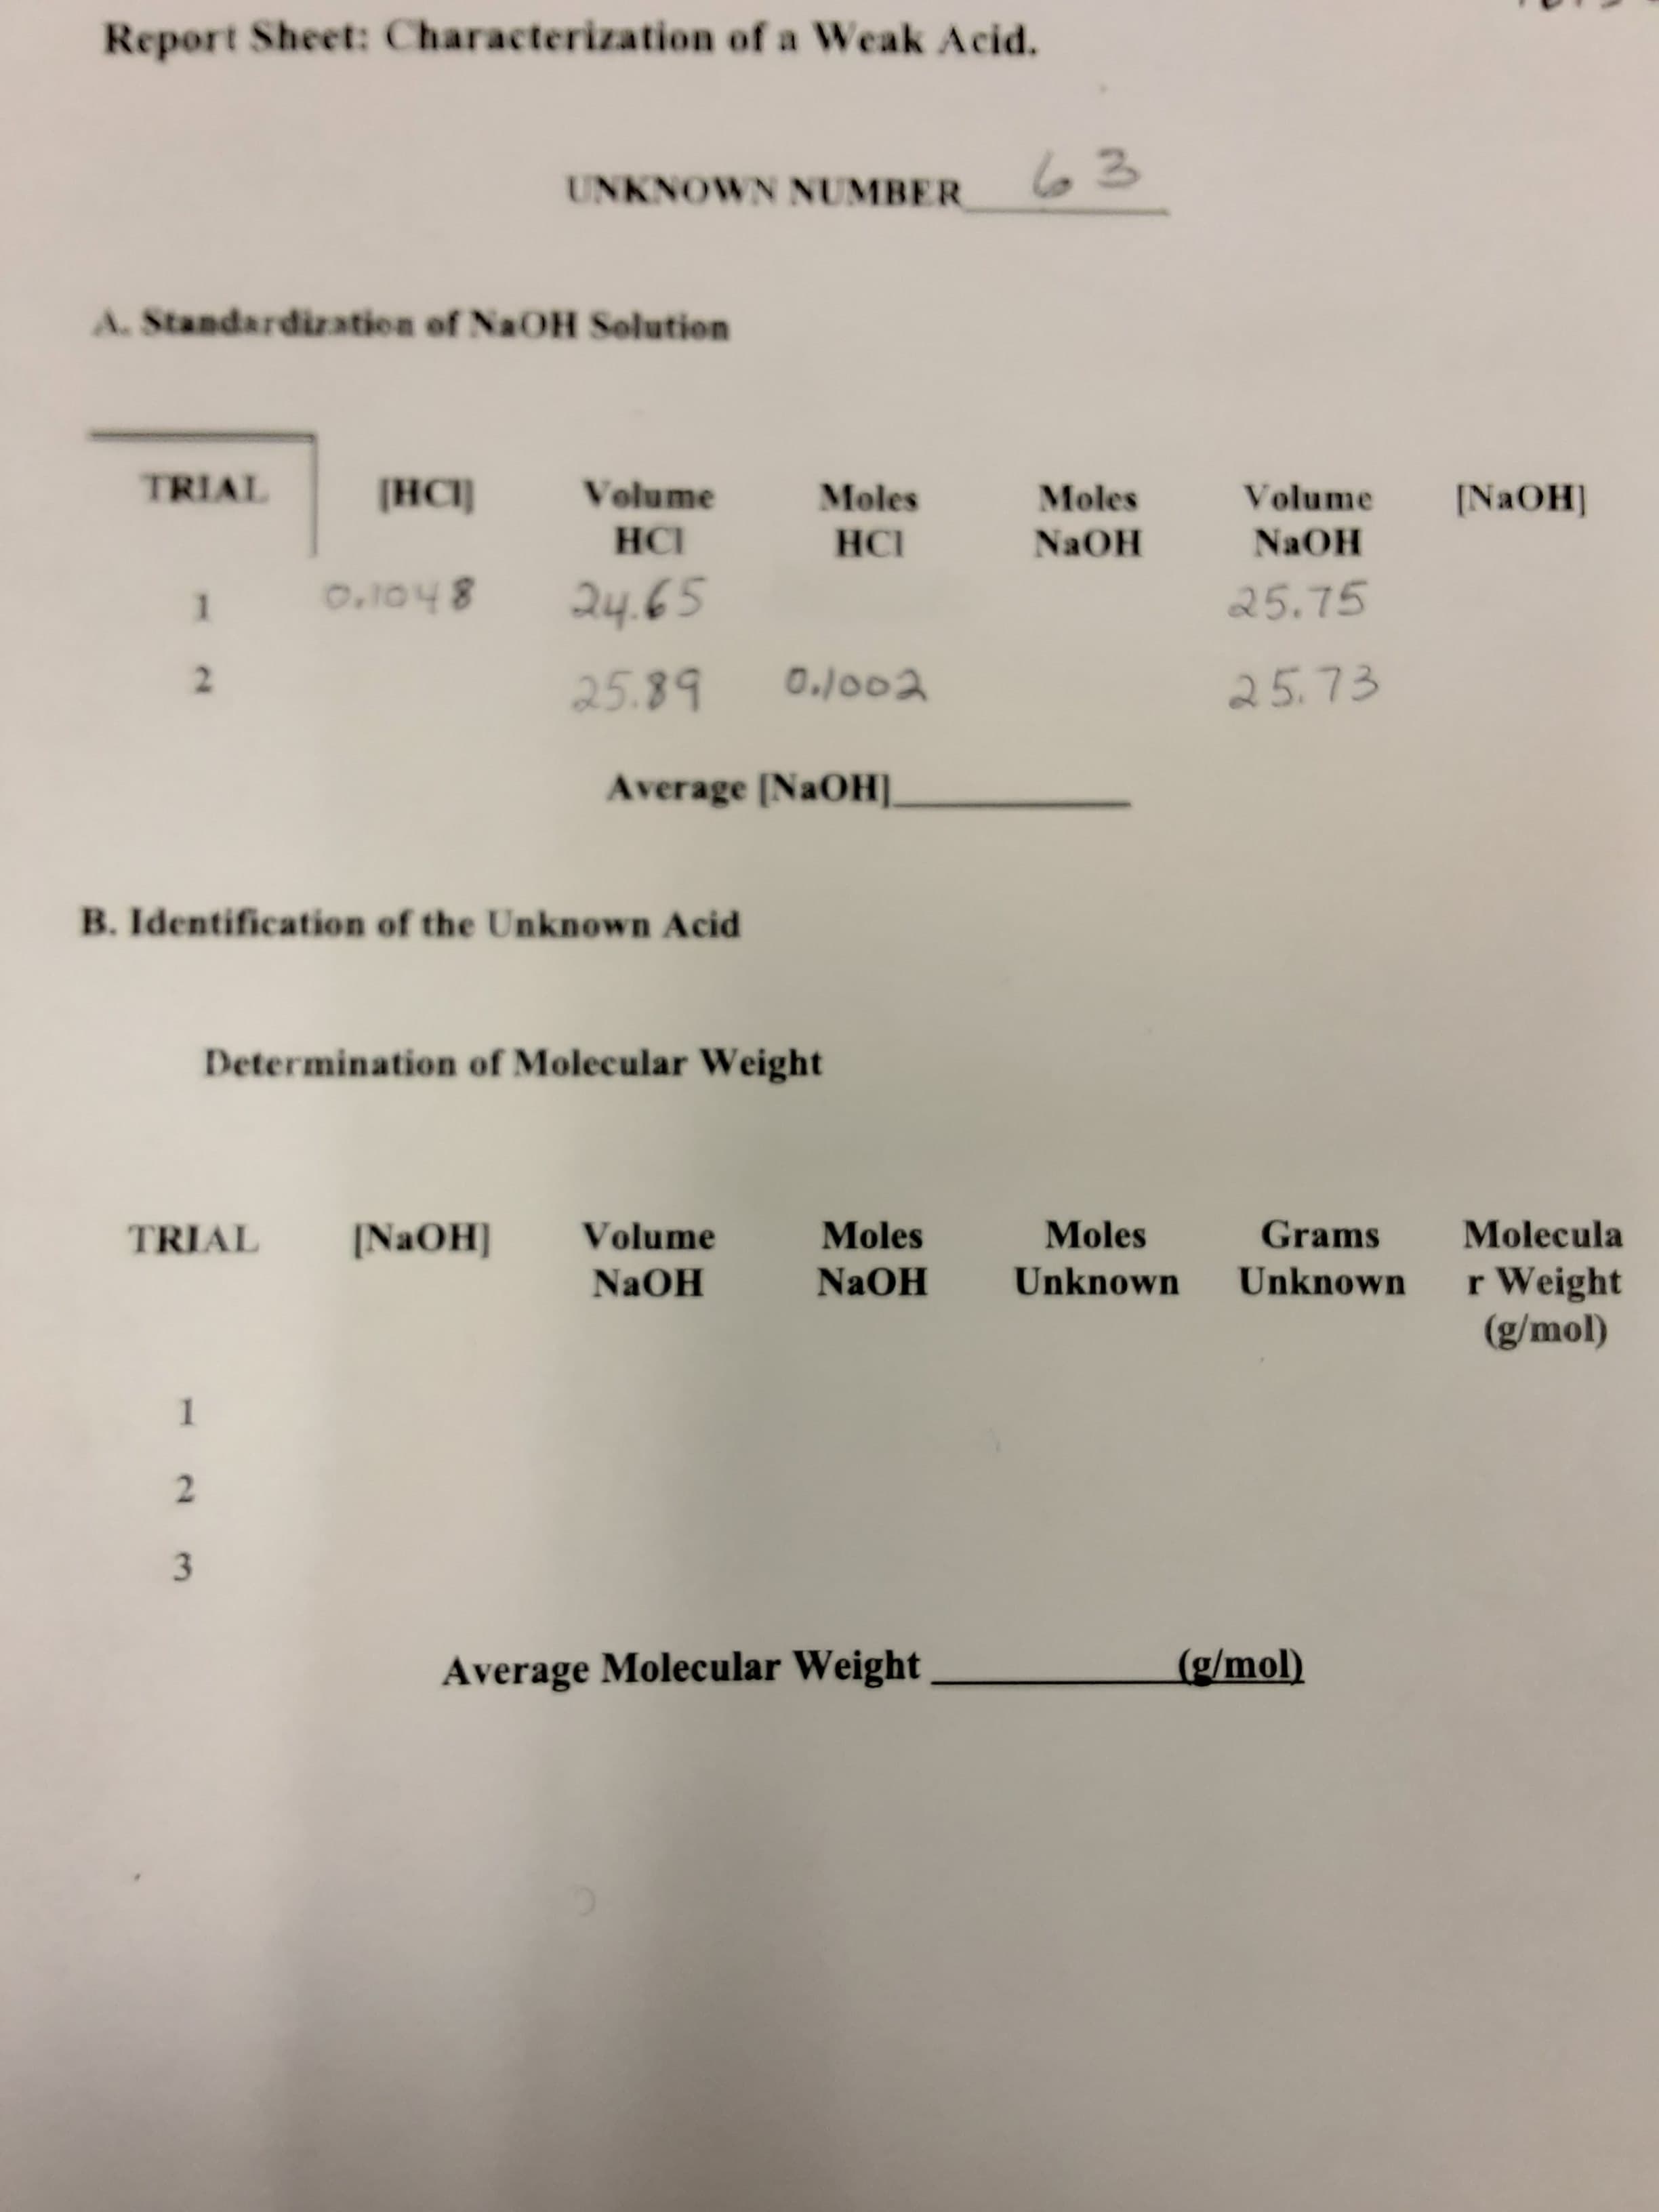 1.
Report Sheet: Characterization of a Weak Acid.
UNKNOWN NUMBER
63
A. Standardization of NaOH Solution
TRIAL
Volume
Moles
Moles
Volume
[NAOH]
HOEN
25.75
HON
8horo
25.89
25.73
2.
Average [NaOH].
B. Identification of the Unknown Acid
Determination of Molecular Weight
Moles
Moles
Grams
Molecula
(HOEN]
NaOH
TRIAL
Volume
r Weight
(g/mol)
NaOH
Unknown
Unknown
2.
Average Molecular Weight
(g/mol)
